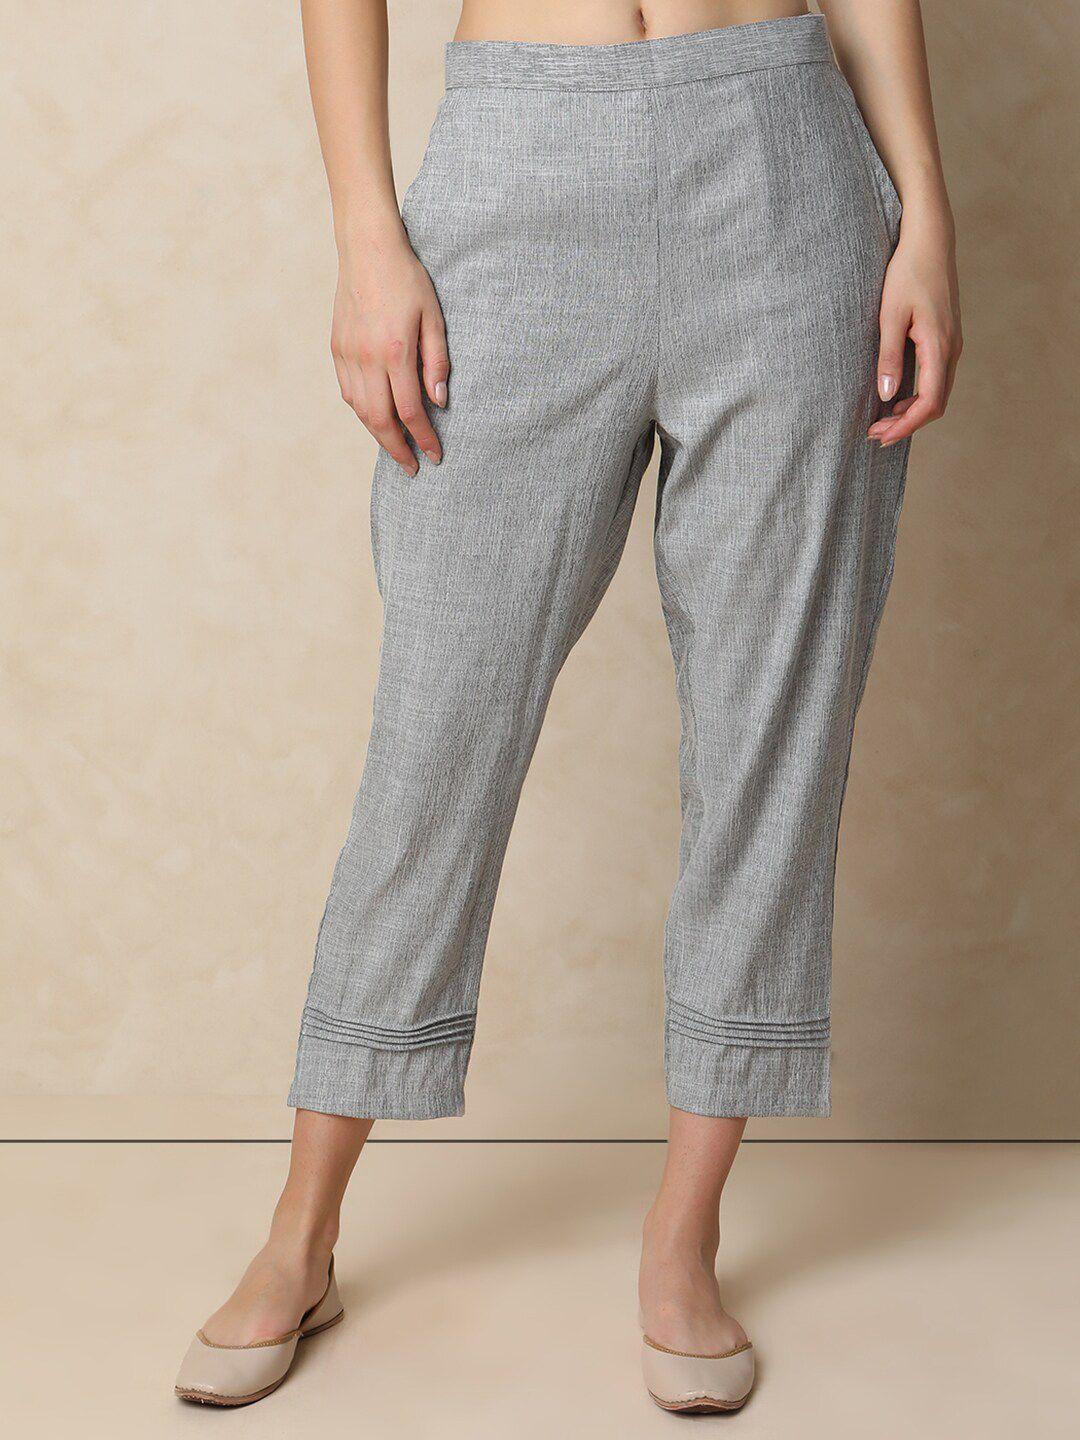 indifusion-women-striped-mid-rise-cotton-culottes-trousers